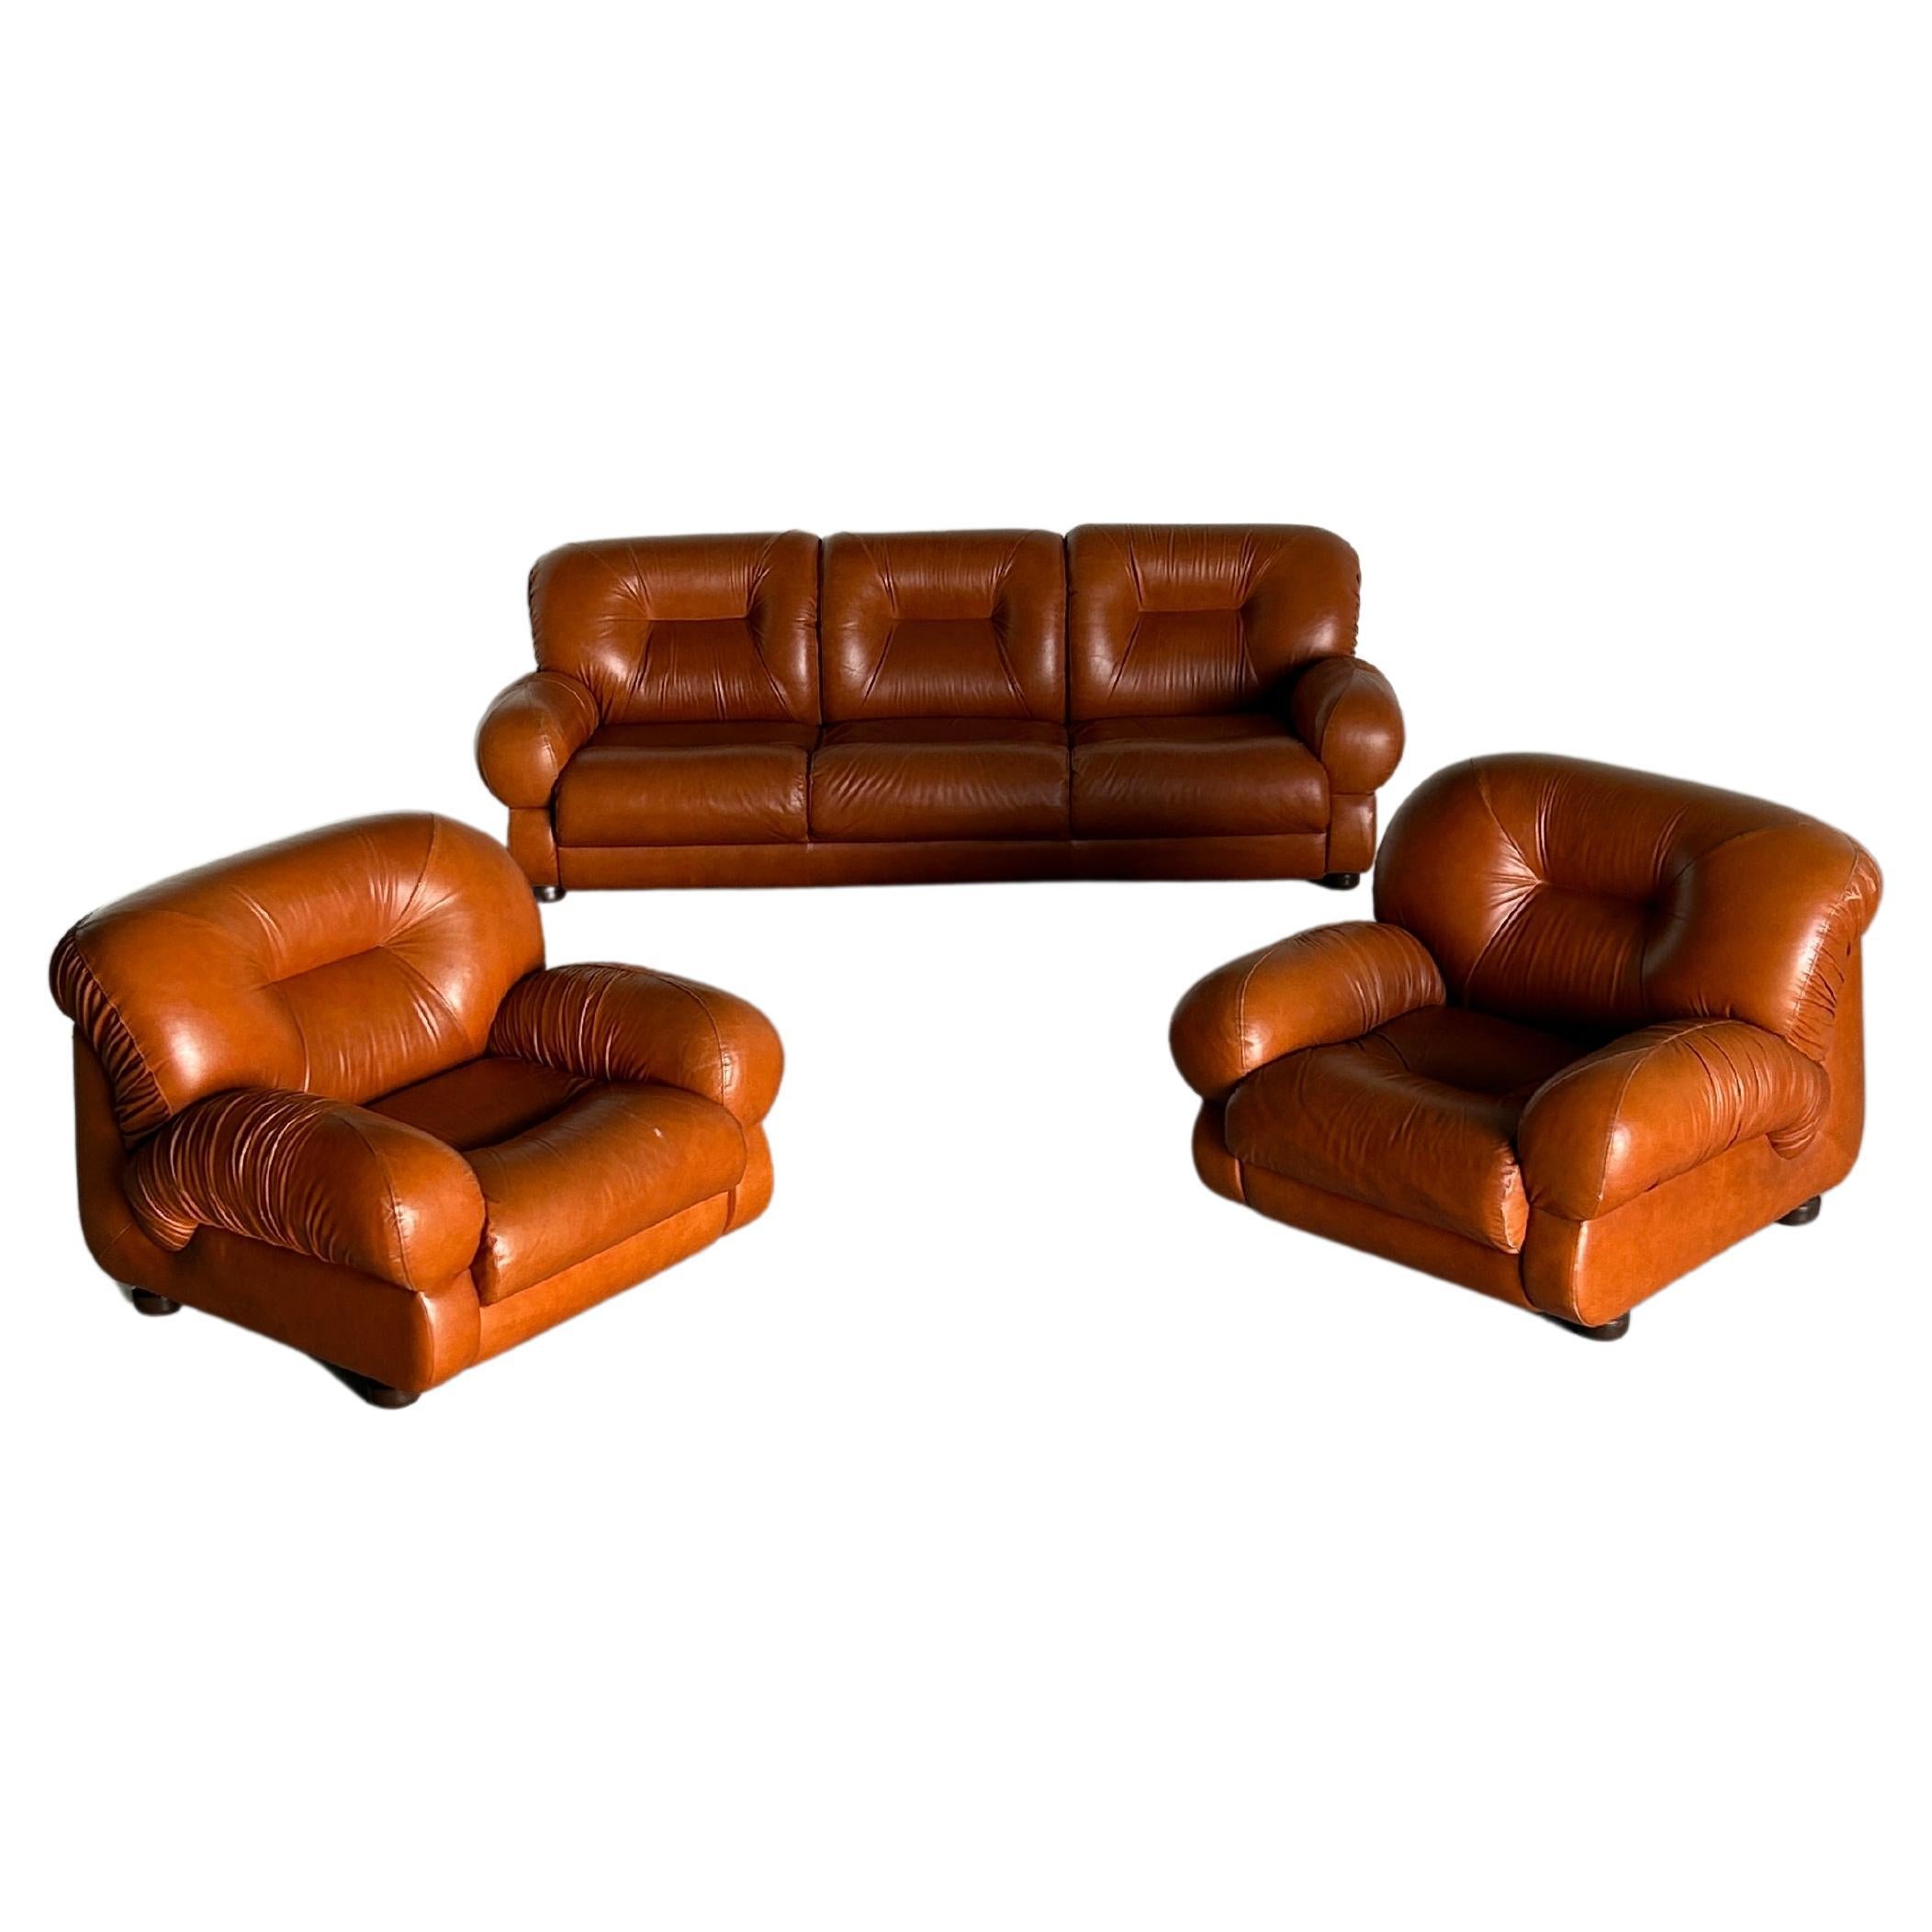 Vintage Italian Ruched Cognac Leather Mid-Century Modern Seating Set, 1970s For Sale